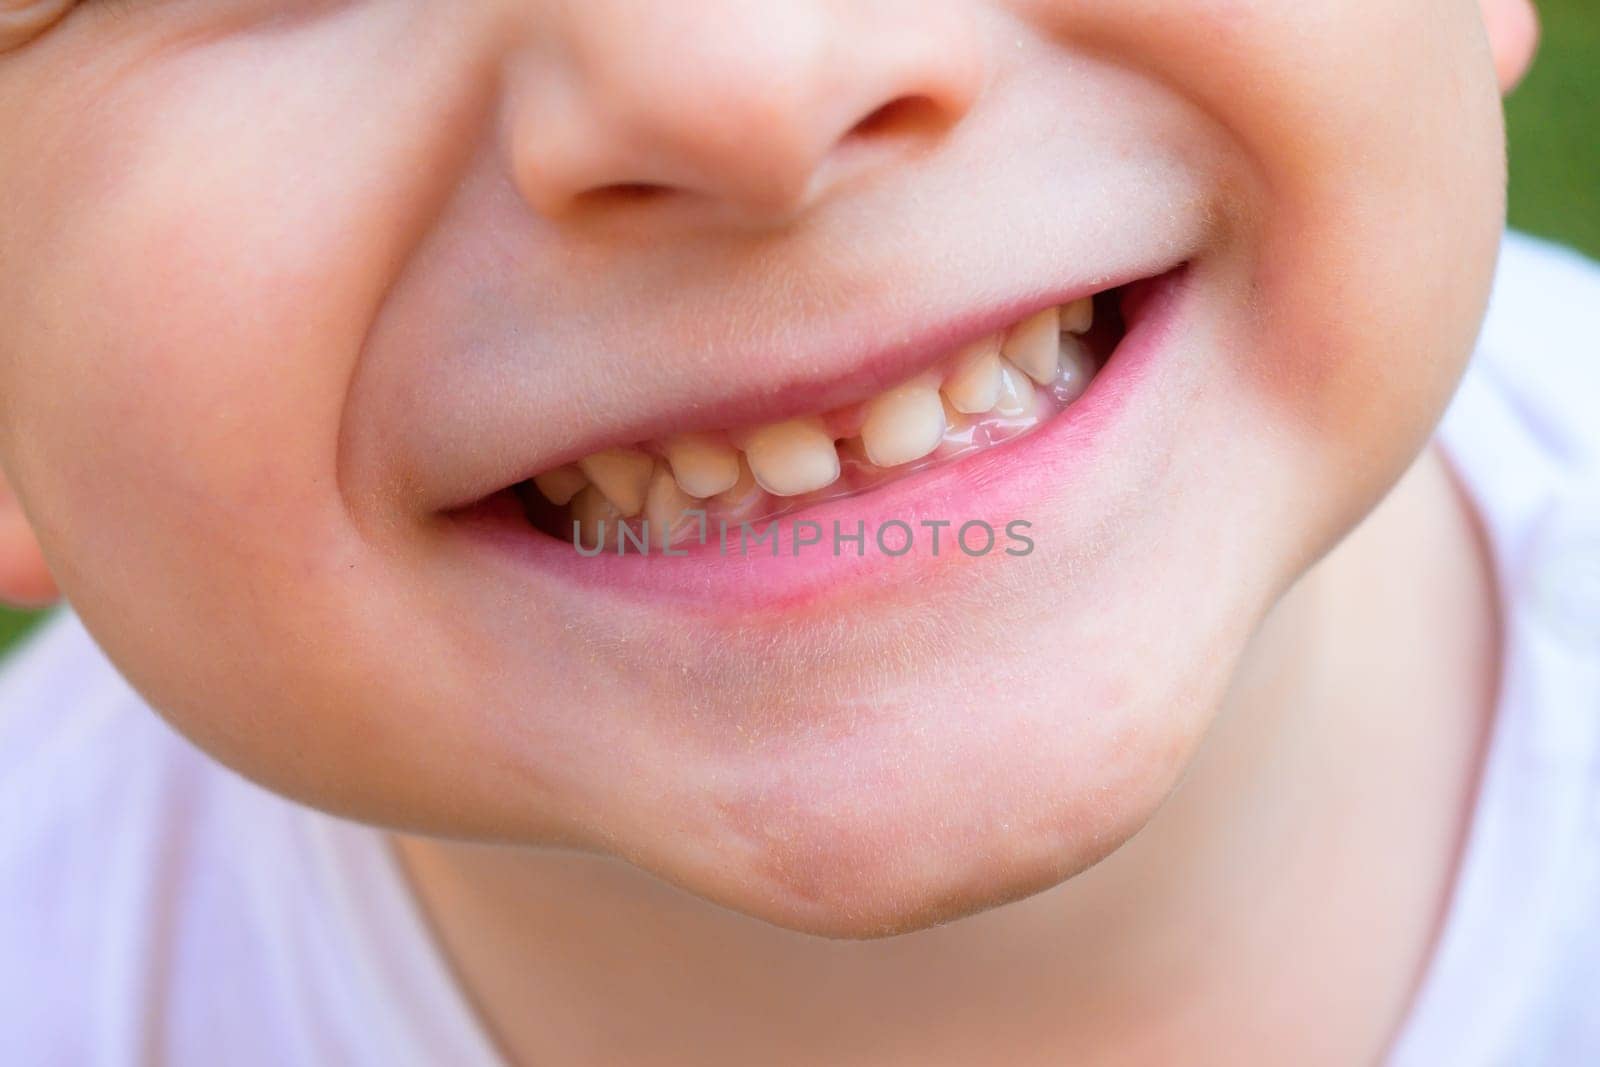 Cheerful child, 2-year-old boy laughing, close-up of part of the child's face, children's mouth, concept of sensory feelings, sincere emotions, speech disorders, development exercises by jcdiazhidalgo